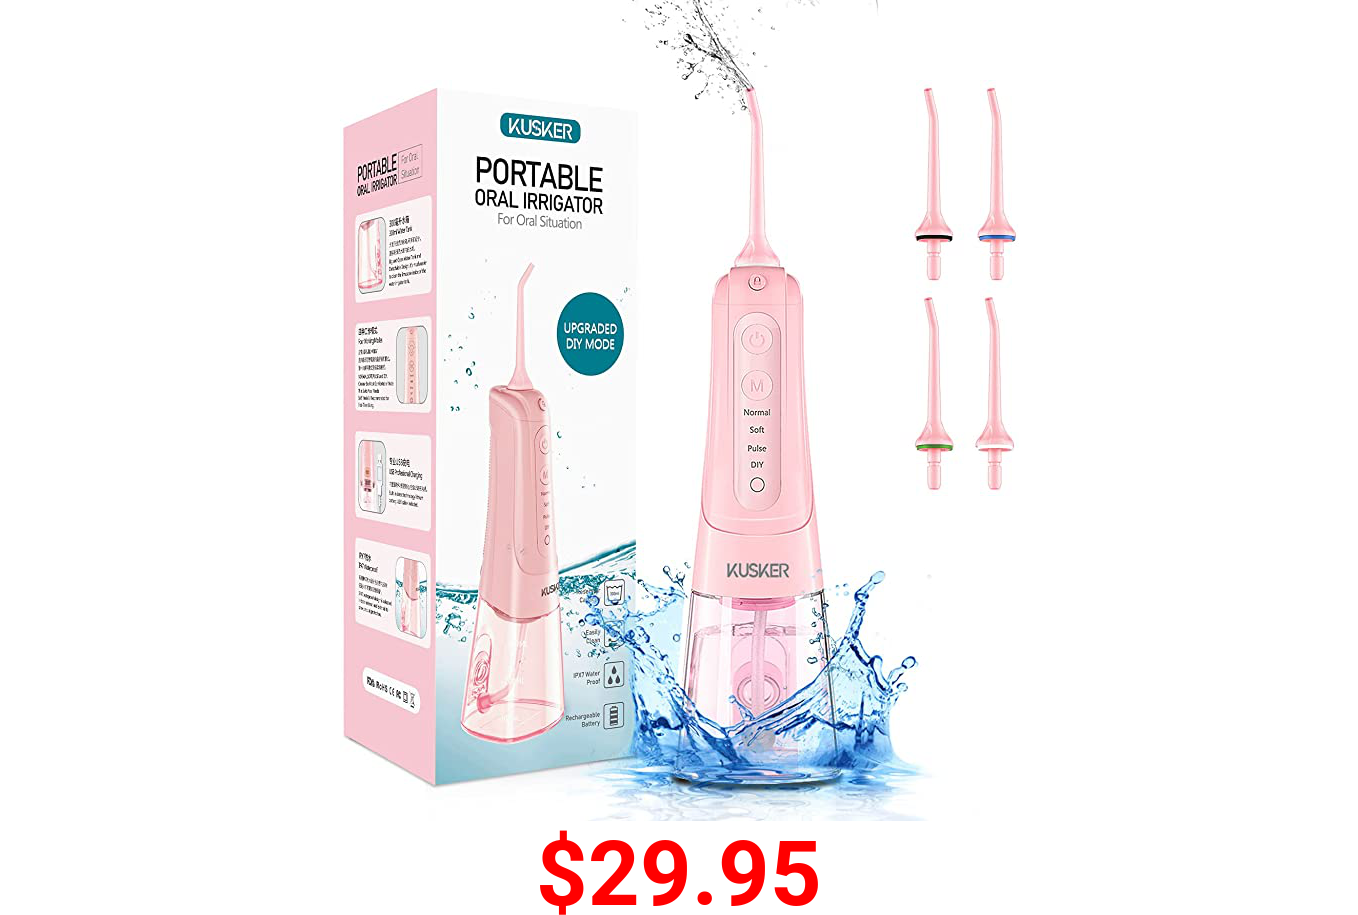 Water Flosser Cordless, KUSKER Portable Dental Oral Irrigator for Teeth, 4 Modes and 4 Jet Tips, IPX7 Waterproof, Rechargeable for 30-Days Use, Home, Travel, Braces, Bridges Care(Pink)